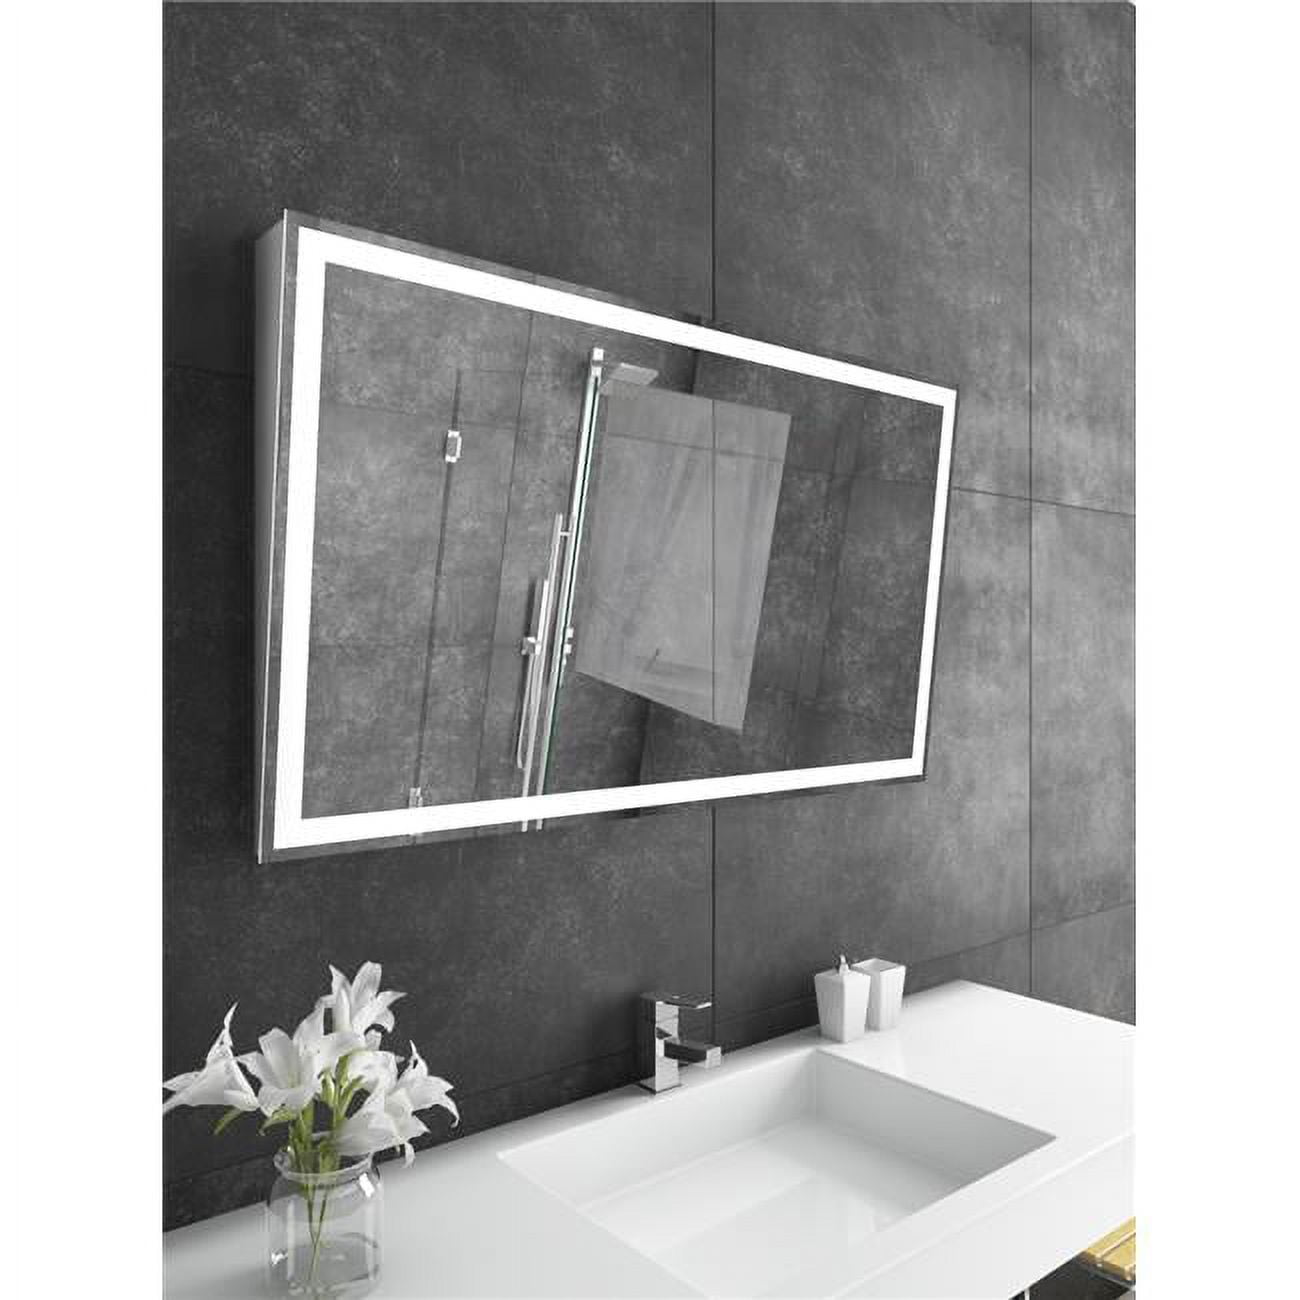 Kyoffiie 4PCS Acrylic Mirrors Set, Self Adhesive Mirror Tiles 2mm Thick  Flexible Unbreakable Mirror Stickers Reflective Square Mirror Wall Stickers  for Bedroom Living Room Bathroom Décor 